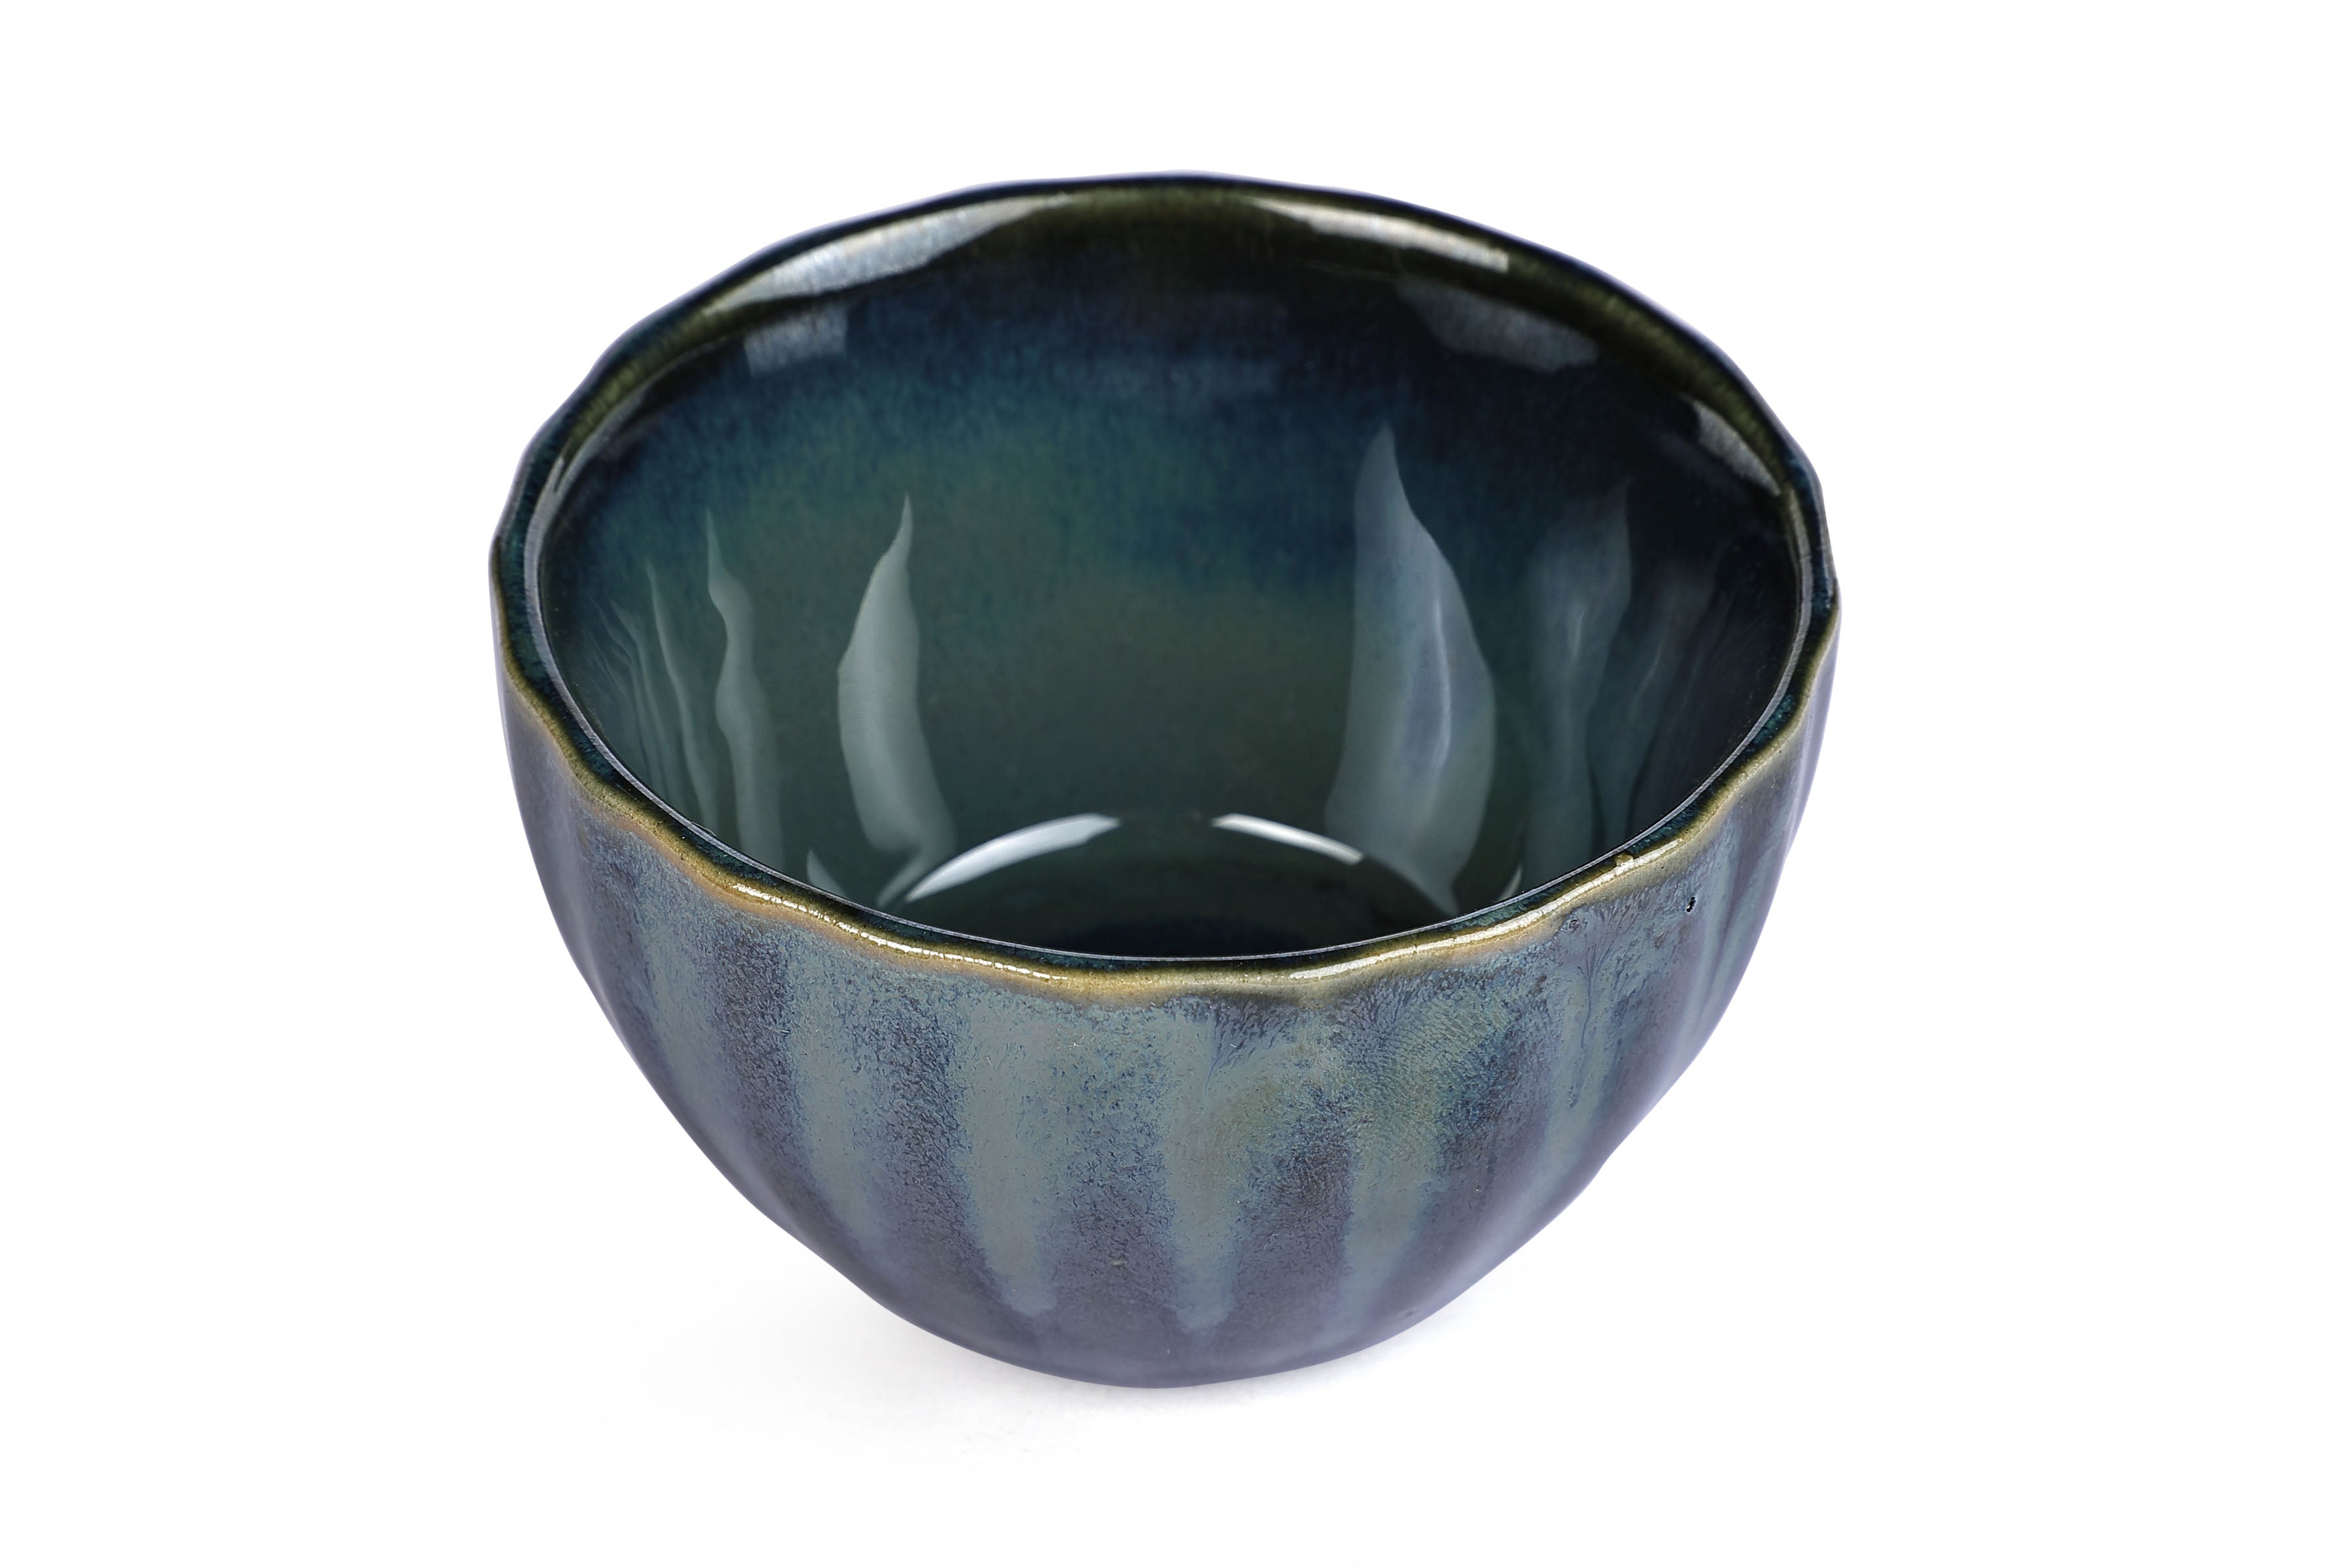 Ceramic Shaded Snack Bowl, Green  3.5x2.2 Inches ( Set of 2)